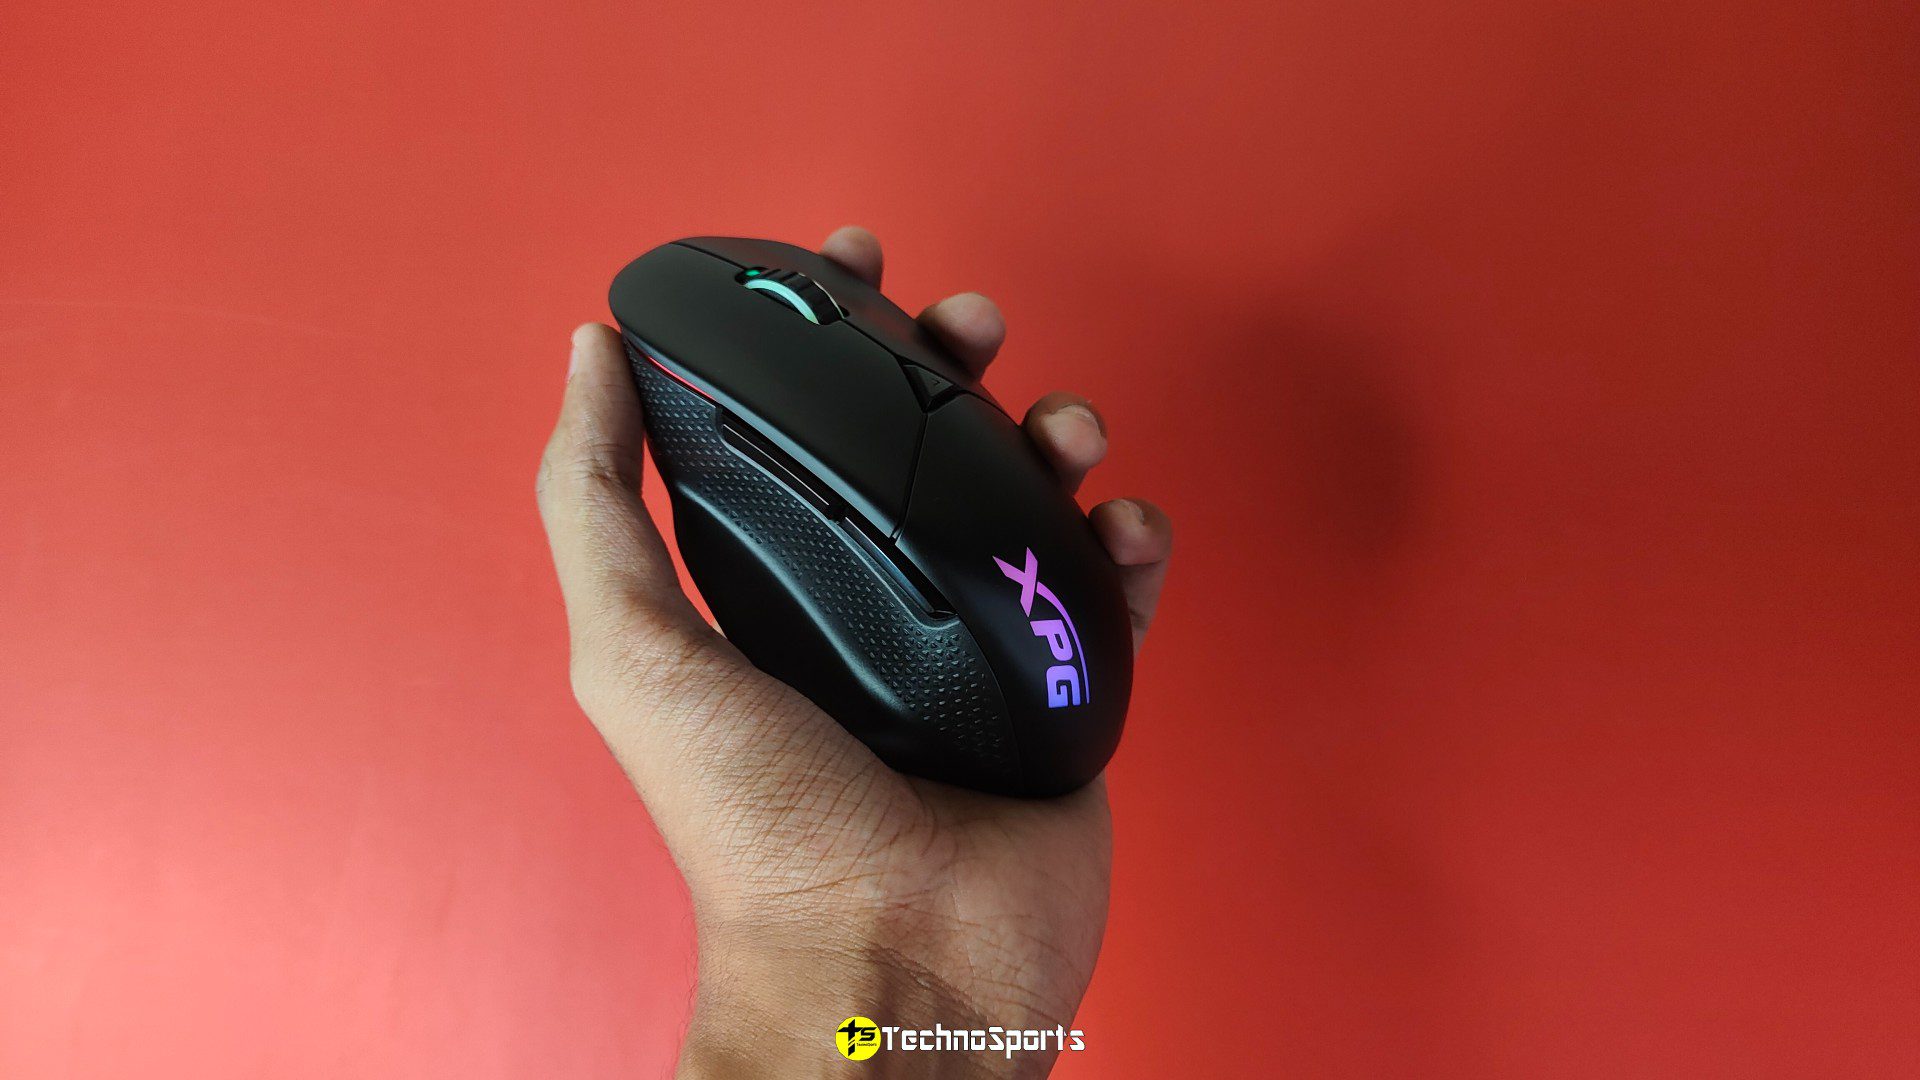 IMG20220910212452 XPG Alpha Wireless Gaming Mouse review: A Premium Wireless Gaming Mouse with ARGB effect